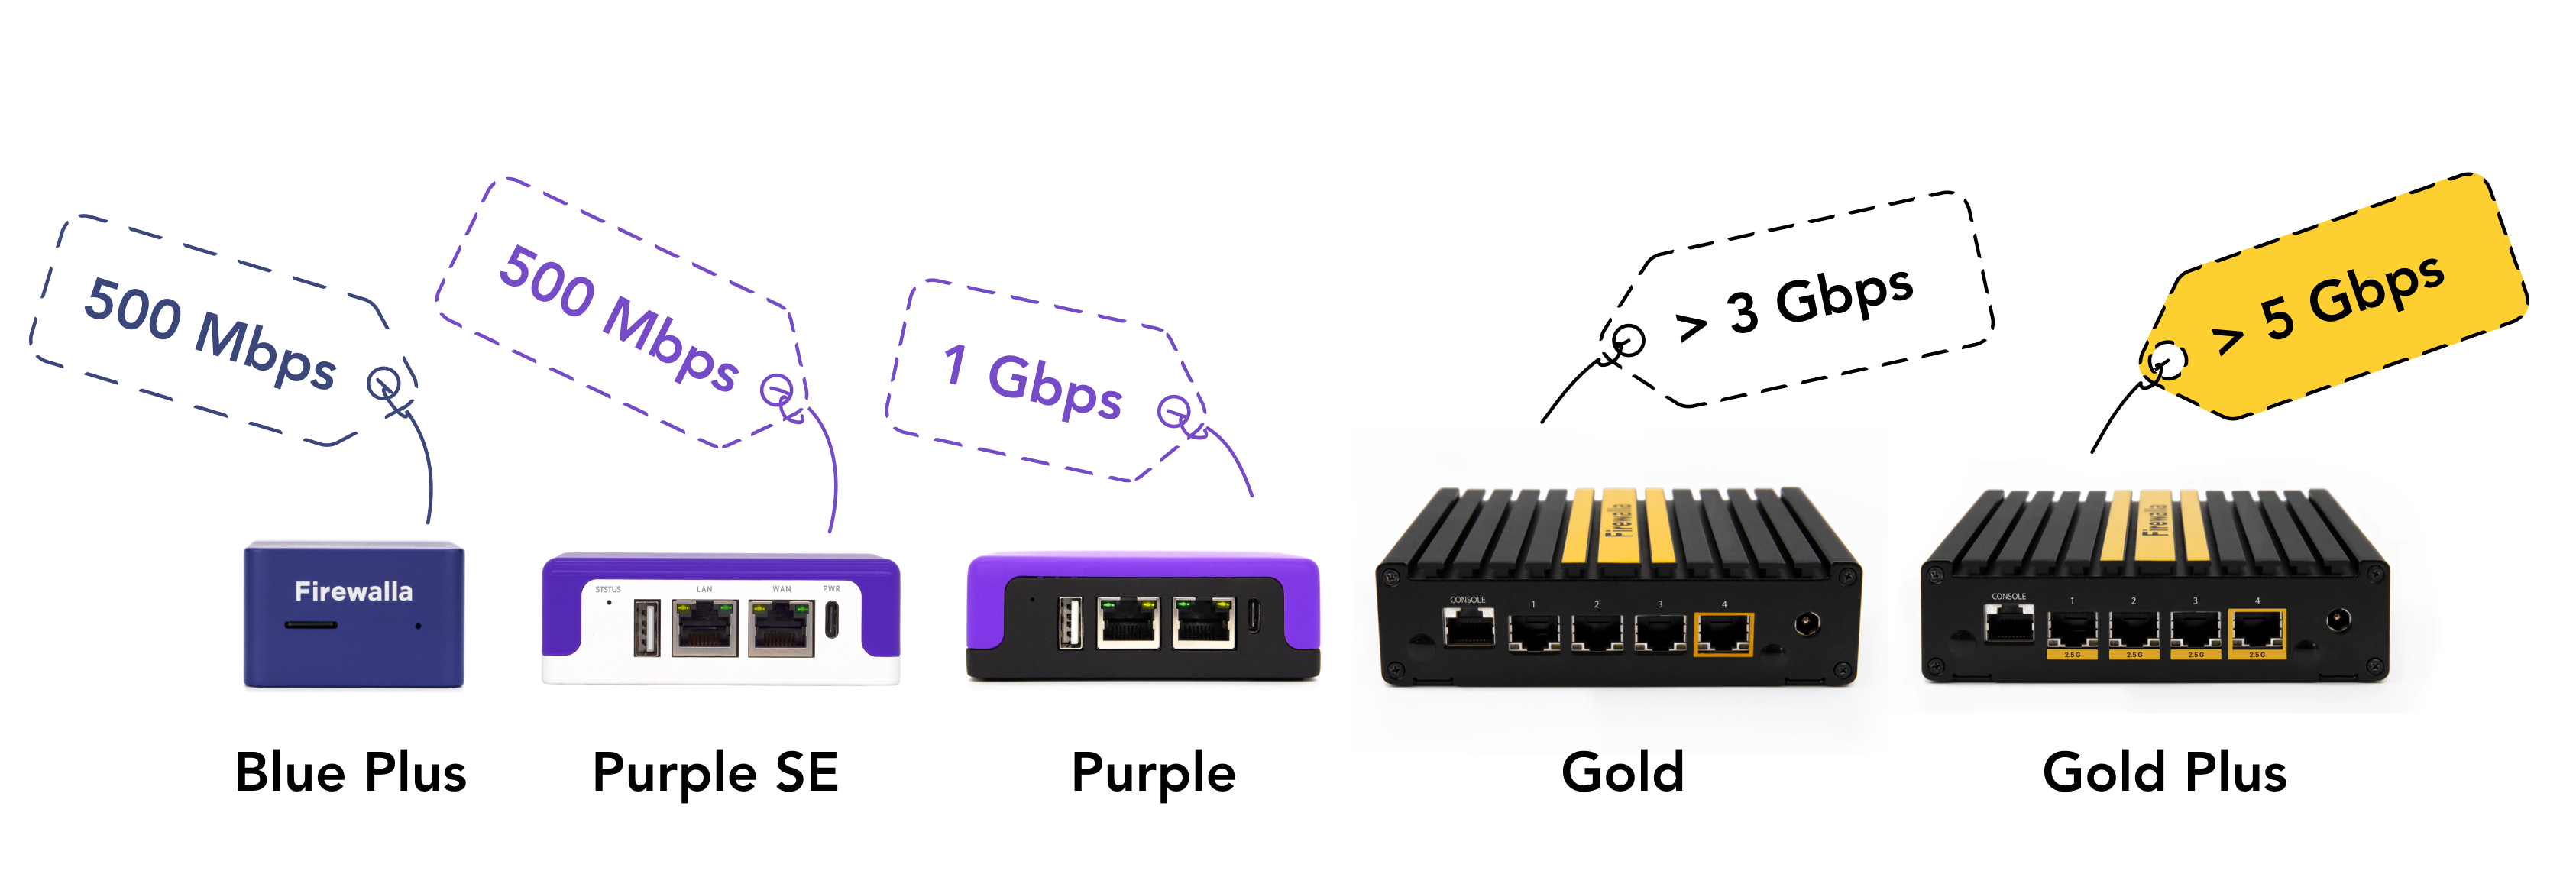 Firewalla product lineup comparison by maximum Gbps